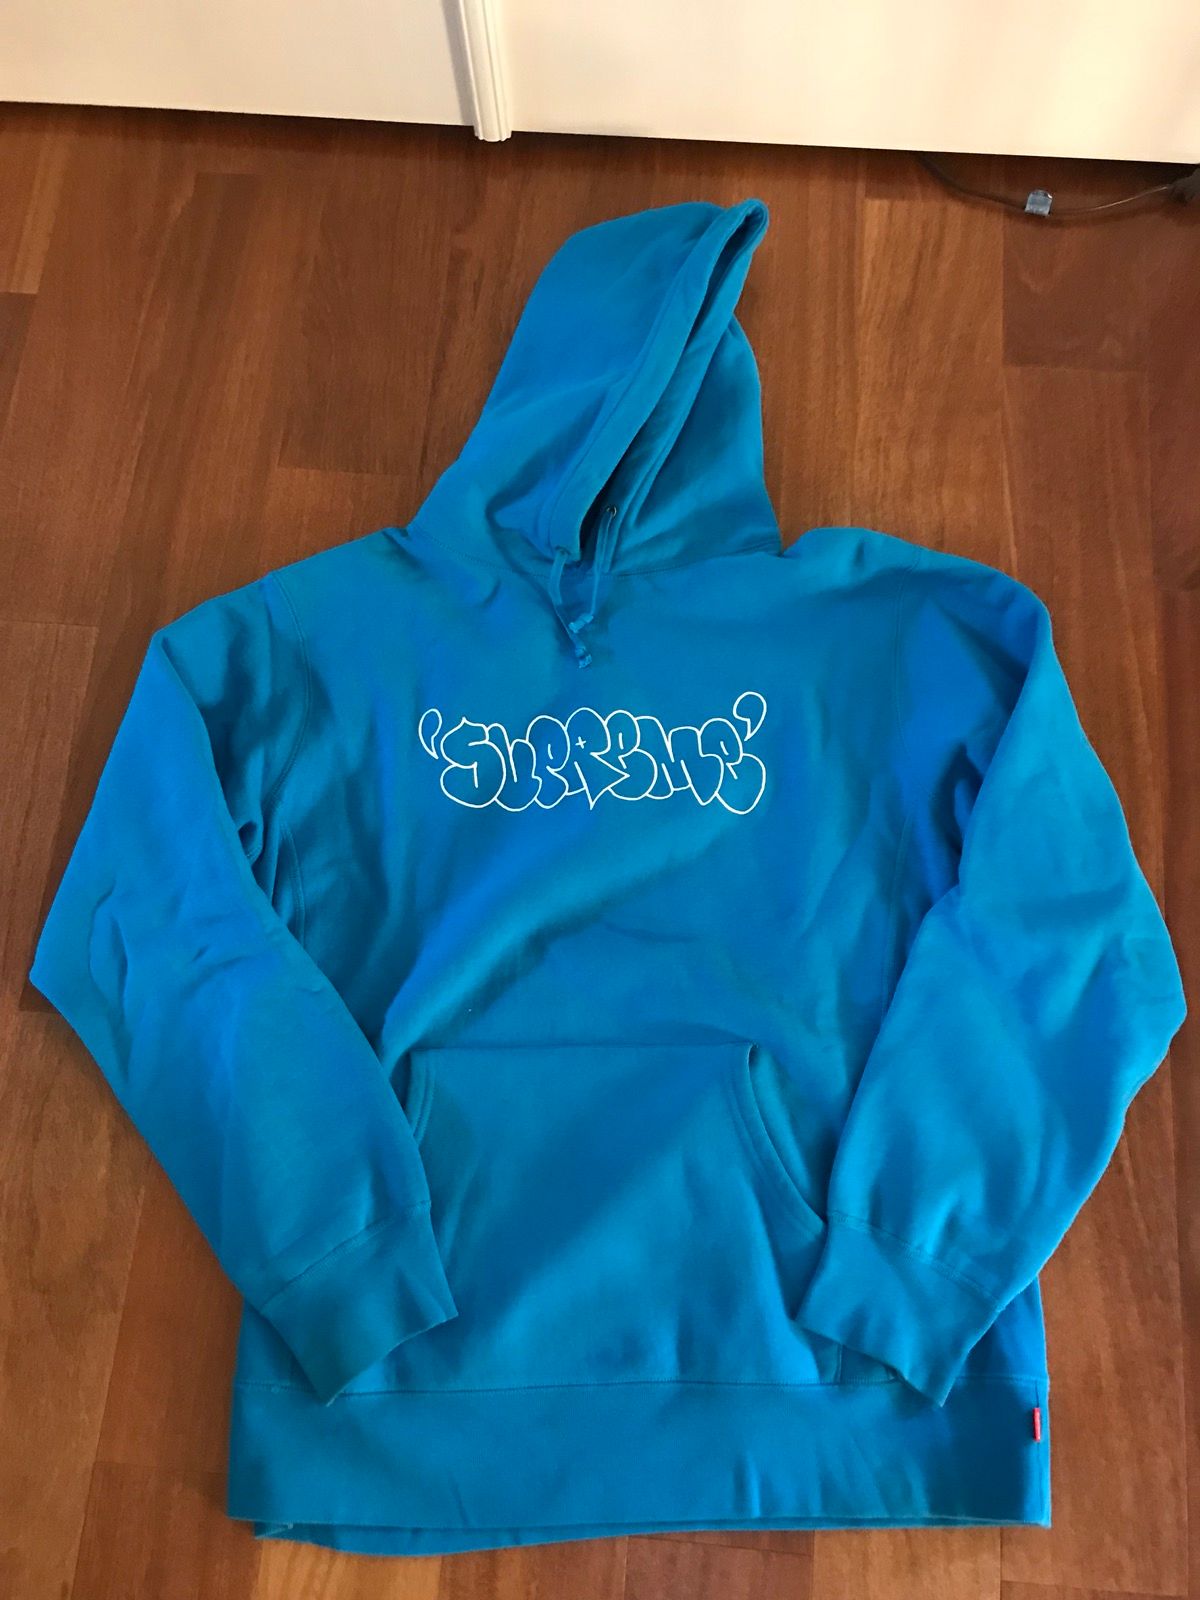 Supreme JA Handstyle Tag Hoodie Size US XL / EU 56 / 4 - 1 Preview